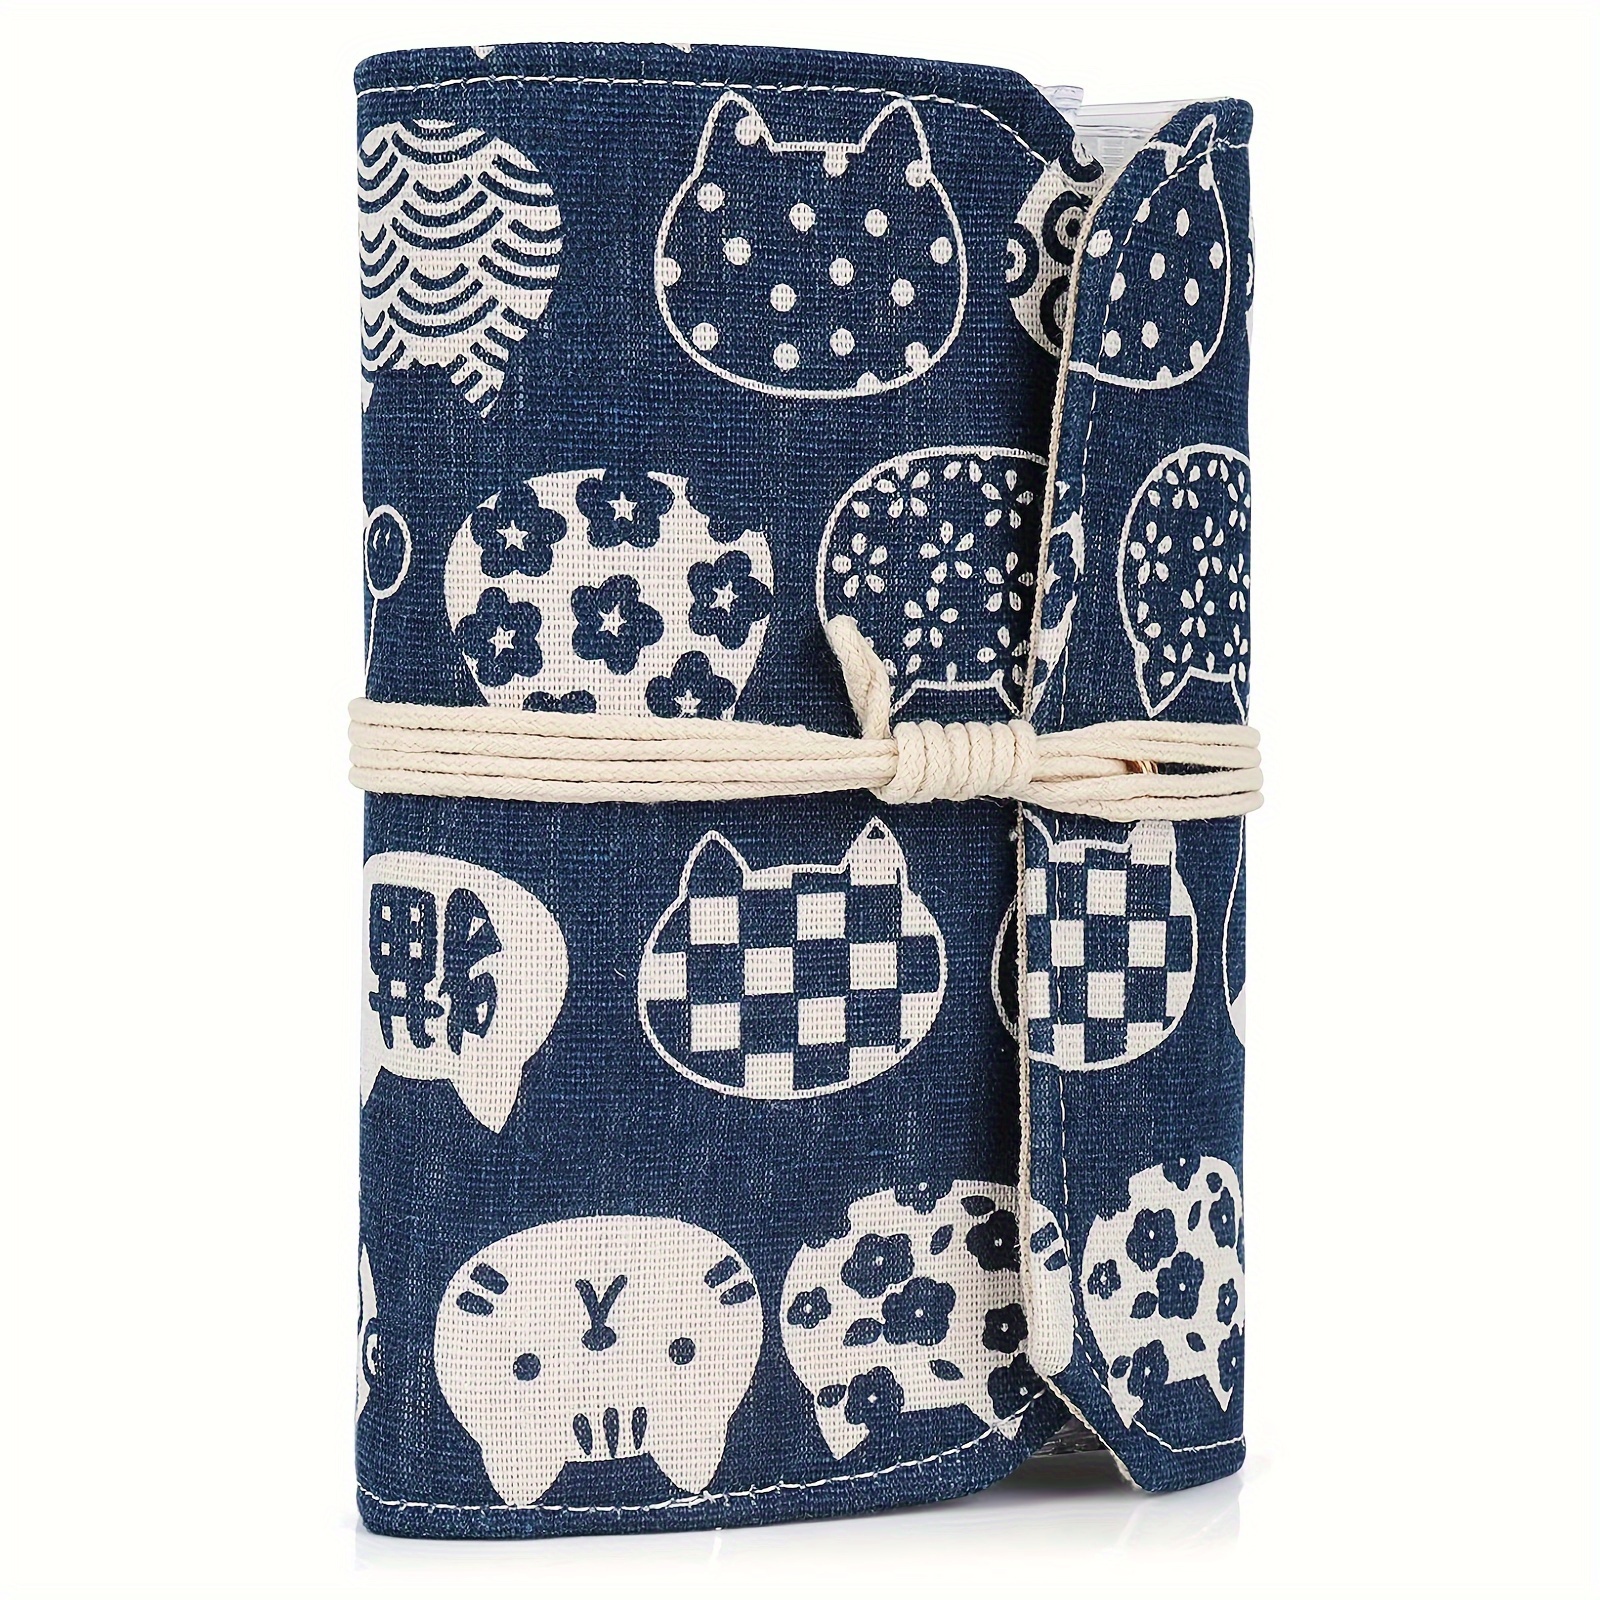 

Cat Patterned Knitting Needle Organizer: Compact Circular Needle Case With 11 Clear Zipper Pockets For Short Or Long Circular Pins Storage